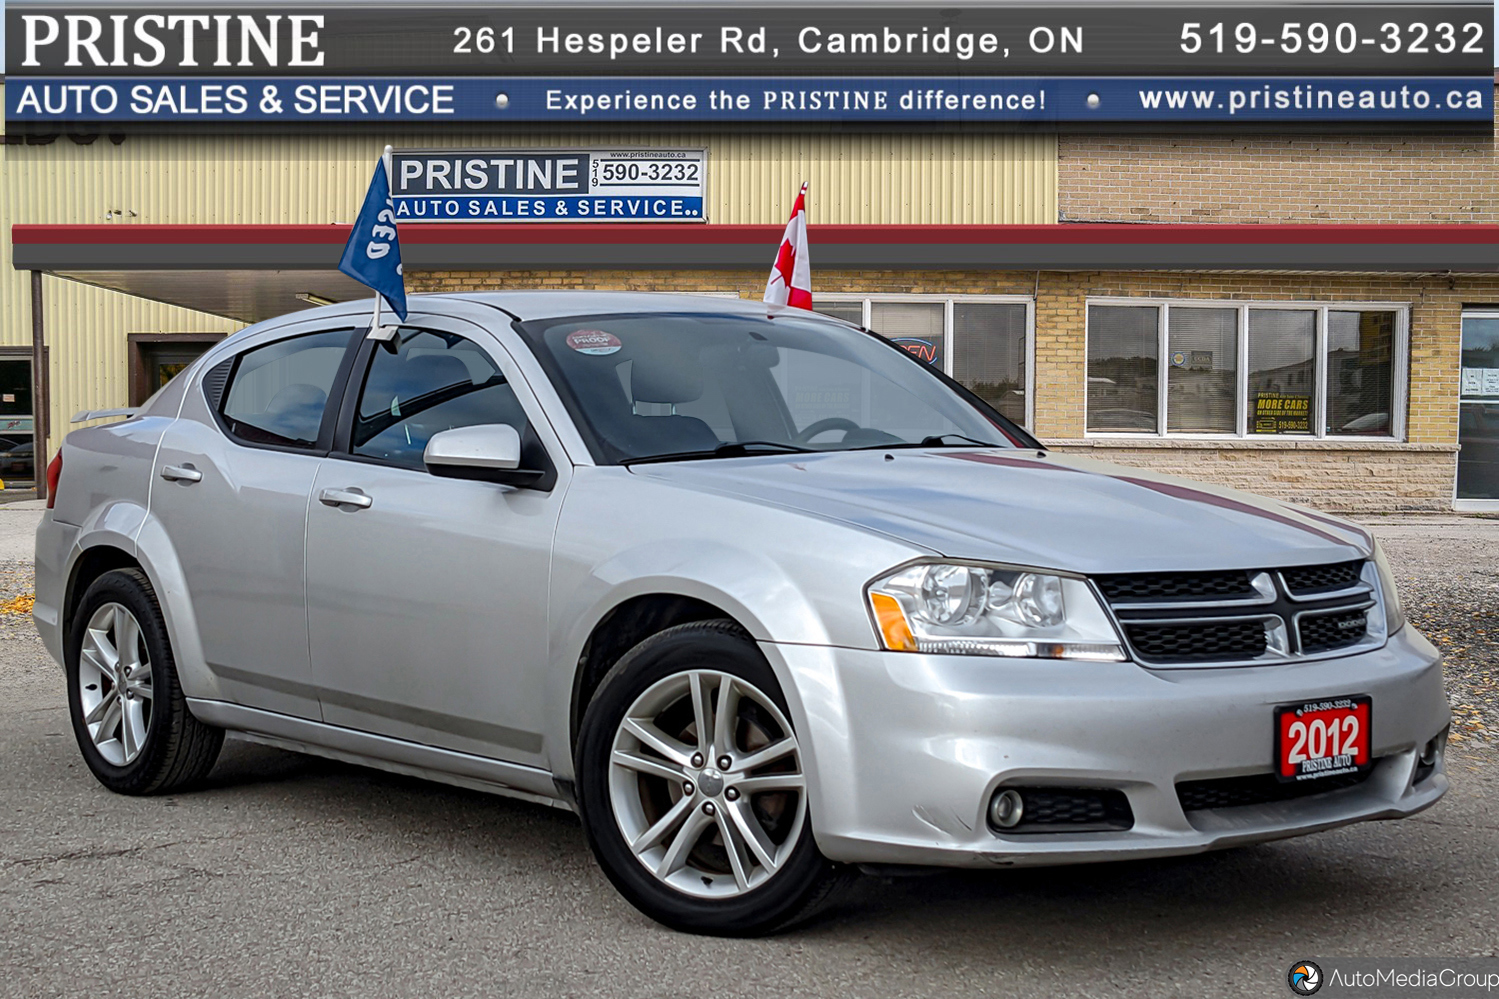 2012 Dodge Avenger SXT Heated Seats One Owner No Accident Rust Free